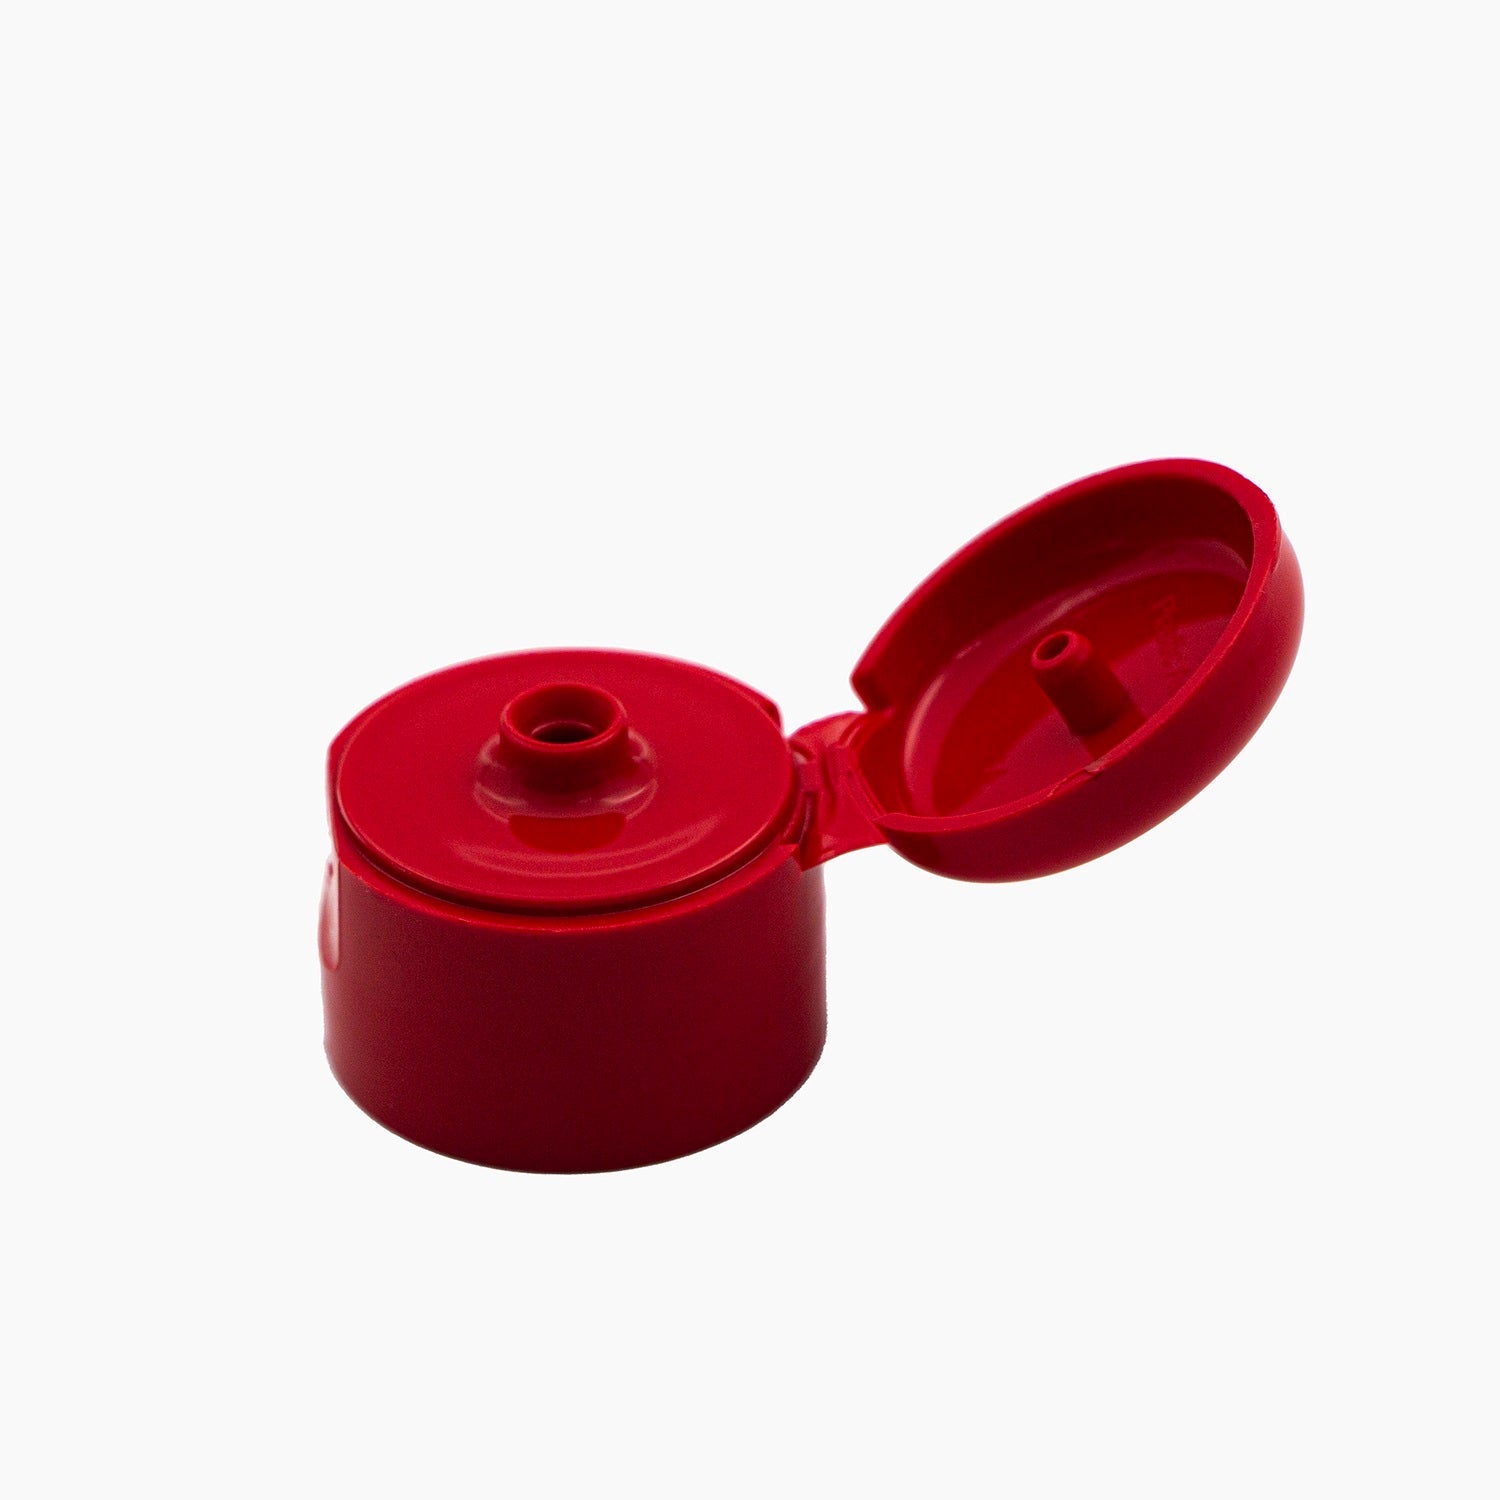 Red 24mm Open Flip Top Cap On A White Background | Brightpack Closures And Accessories